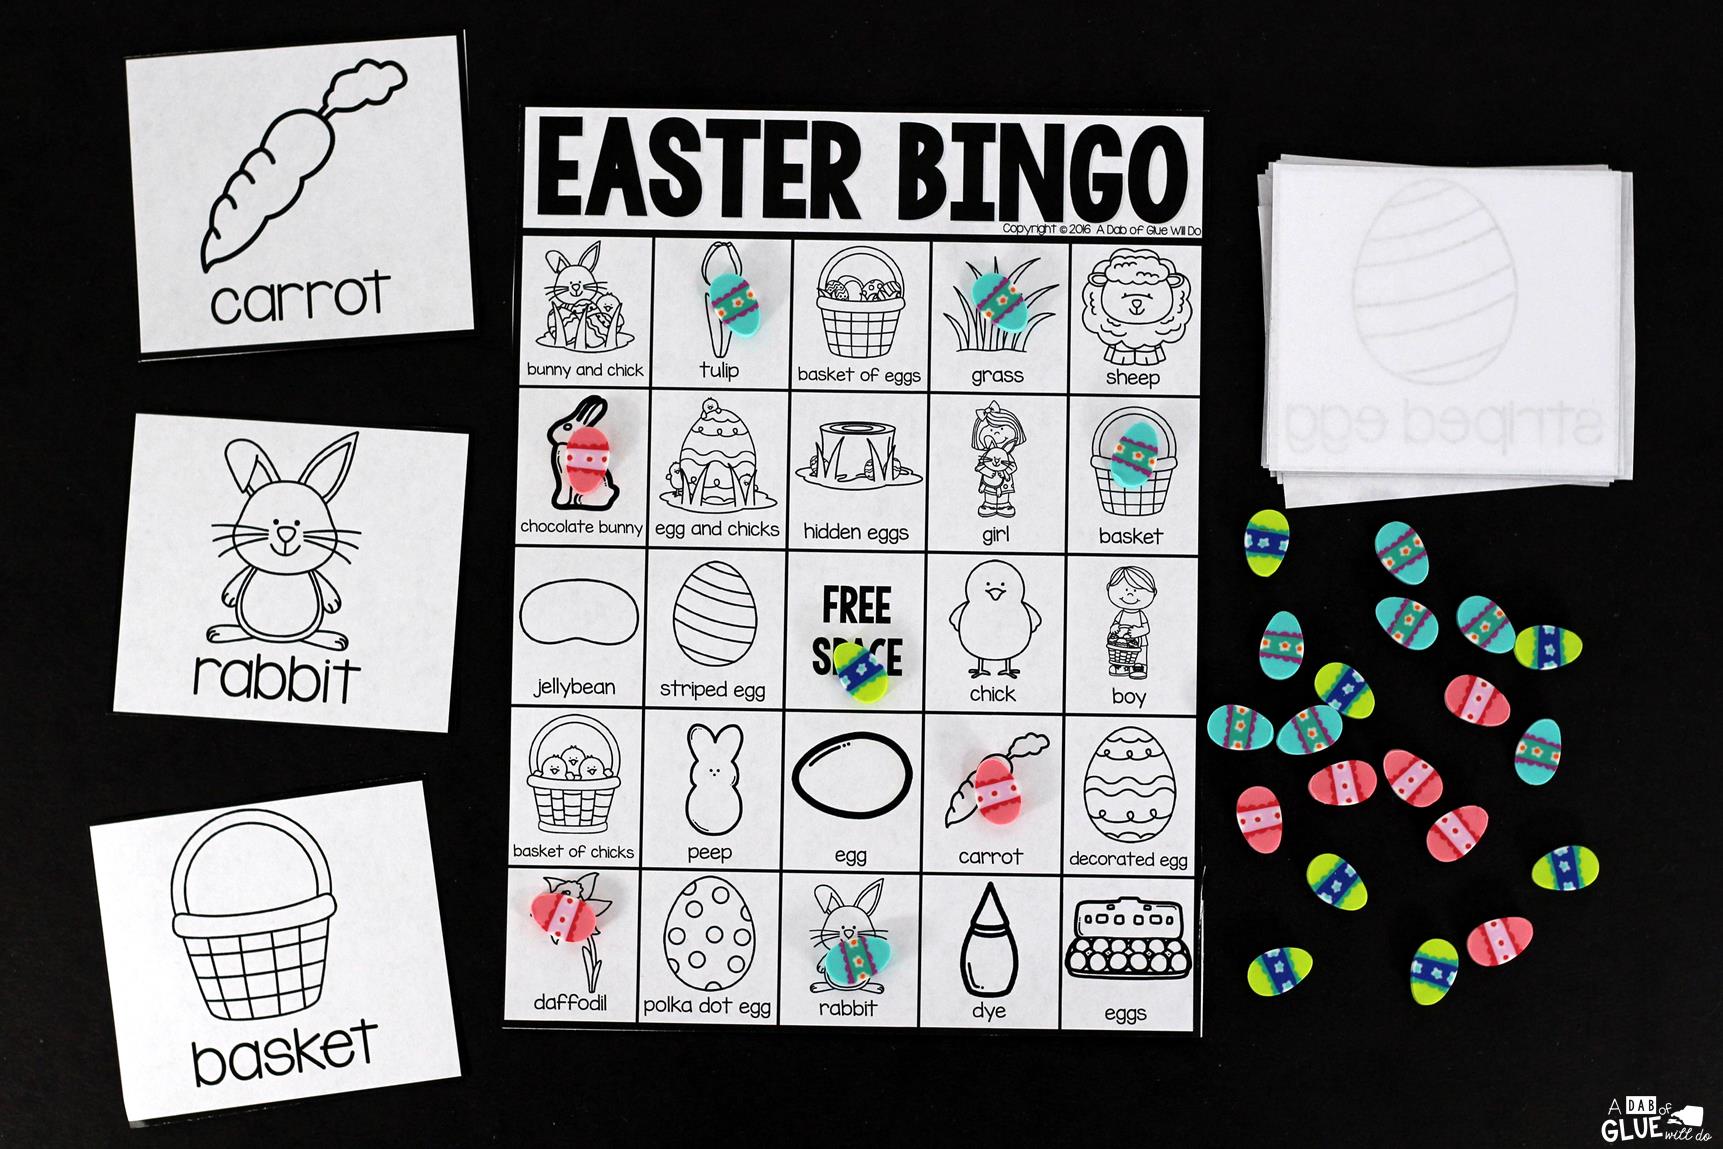 Play Bingo with your elementary age students with these fun Bingo Sheets for Easter! Perfect for large groups in your classroom or small review groups. Add this to your Easter party with 30 unique themed Bingo boards with your students! Teaching cards are also included in this fun game for young children! Black and white options available to save your color ink.